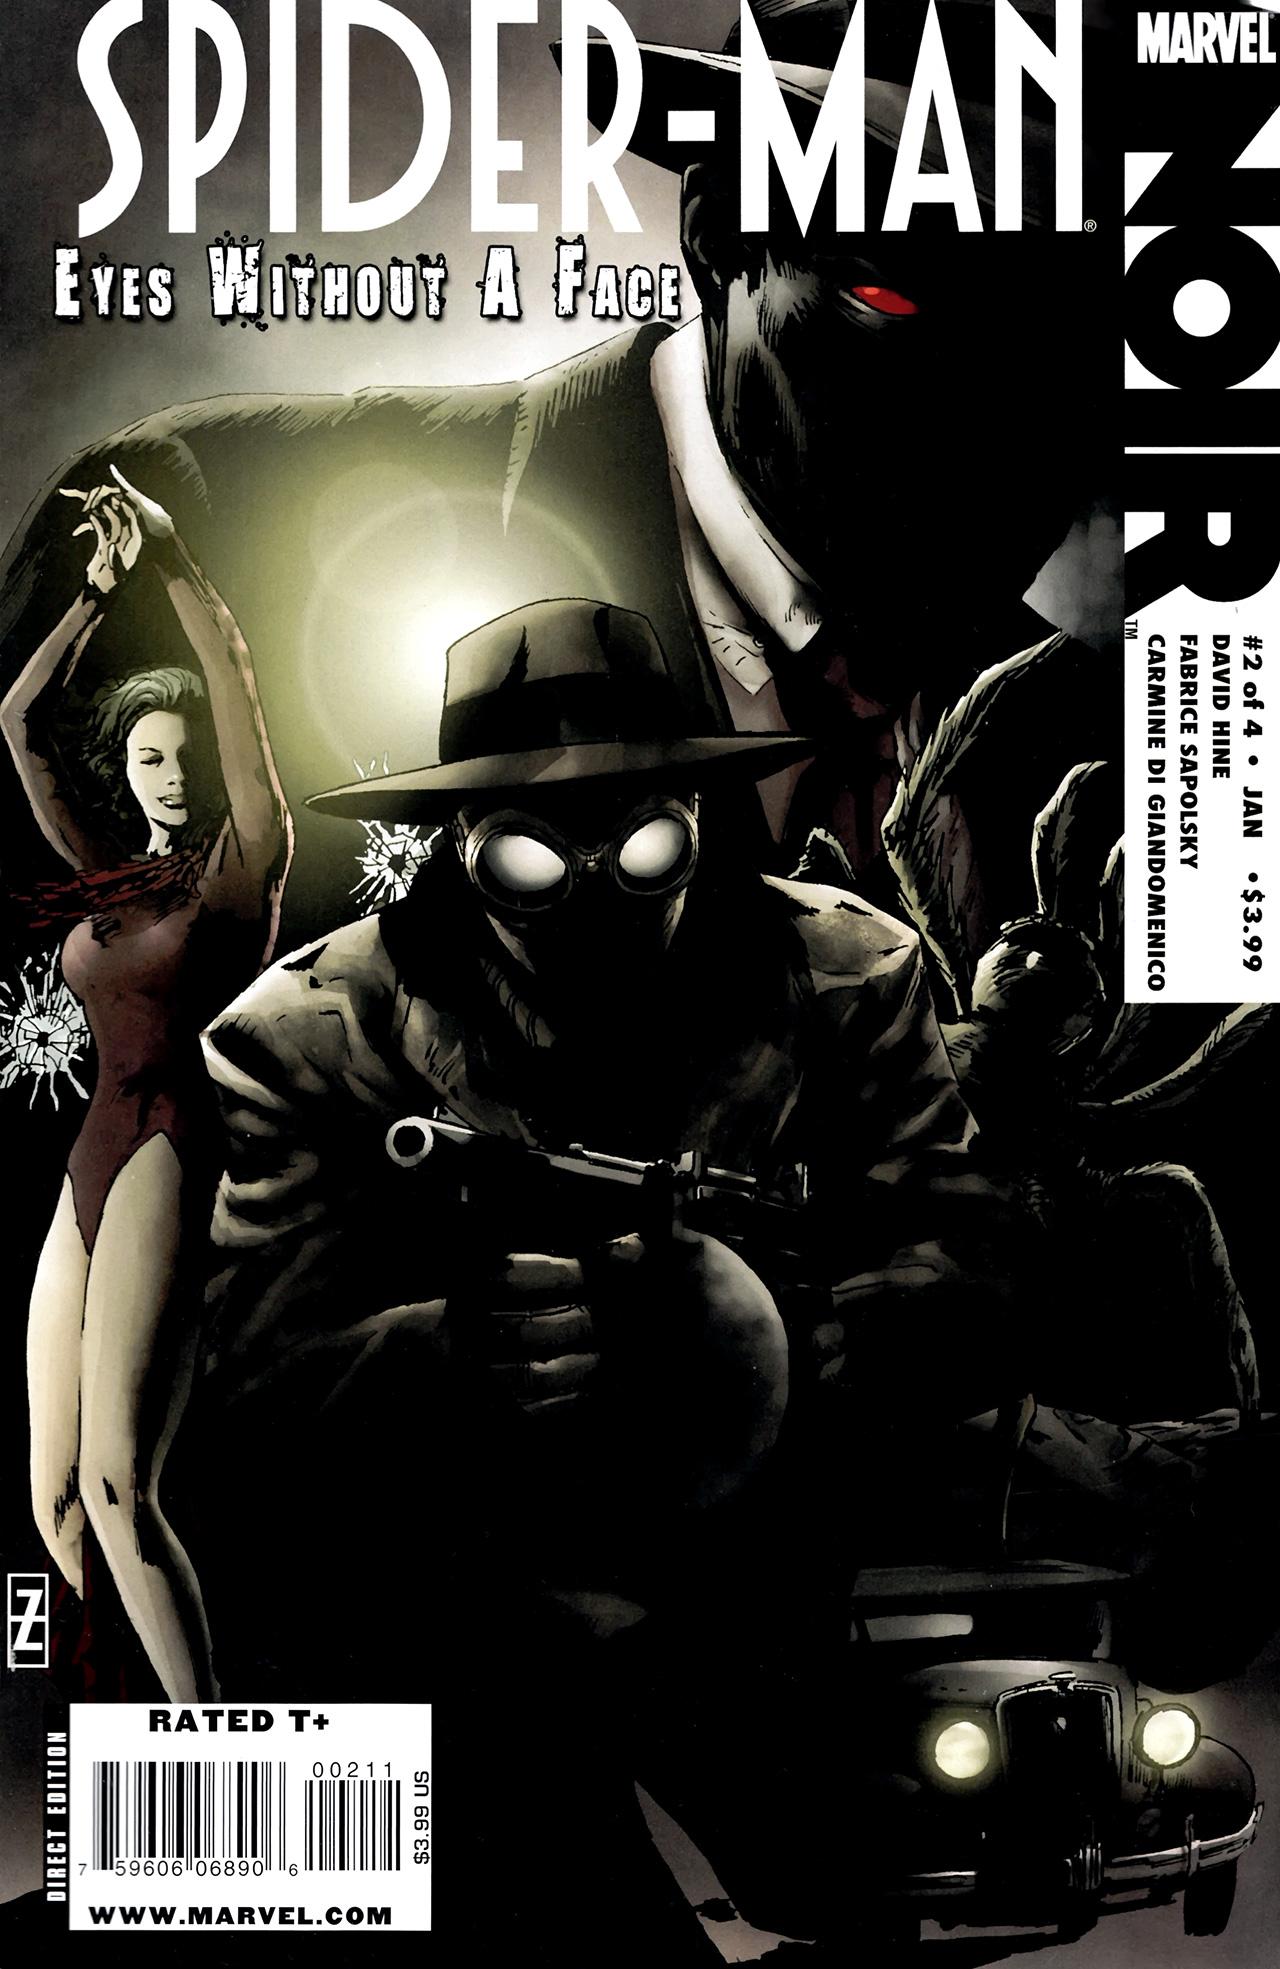 Spider-Man Noir: Eyes Without A Face Vol. 1 #2